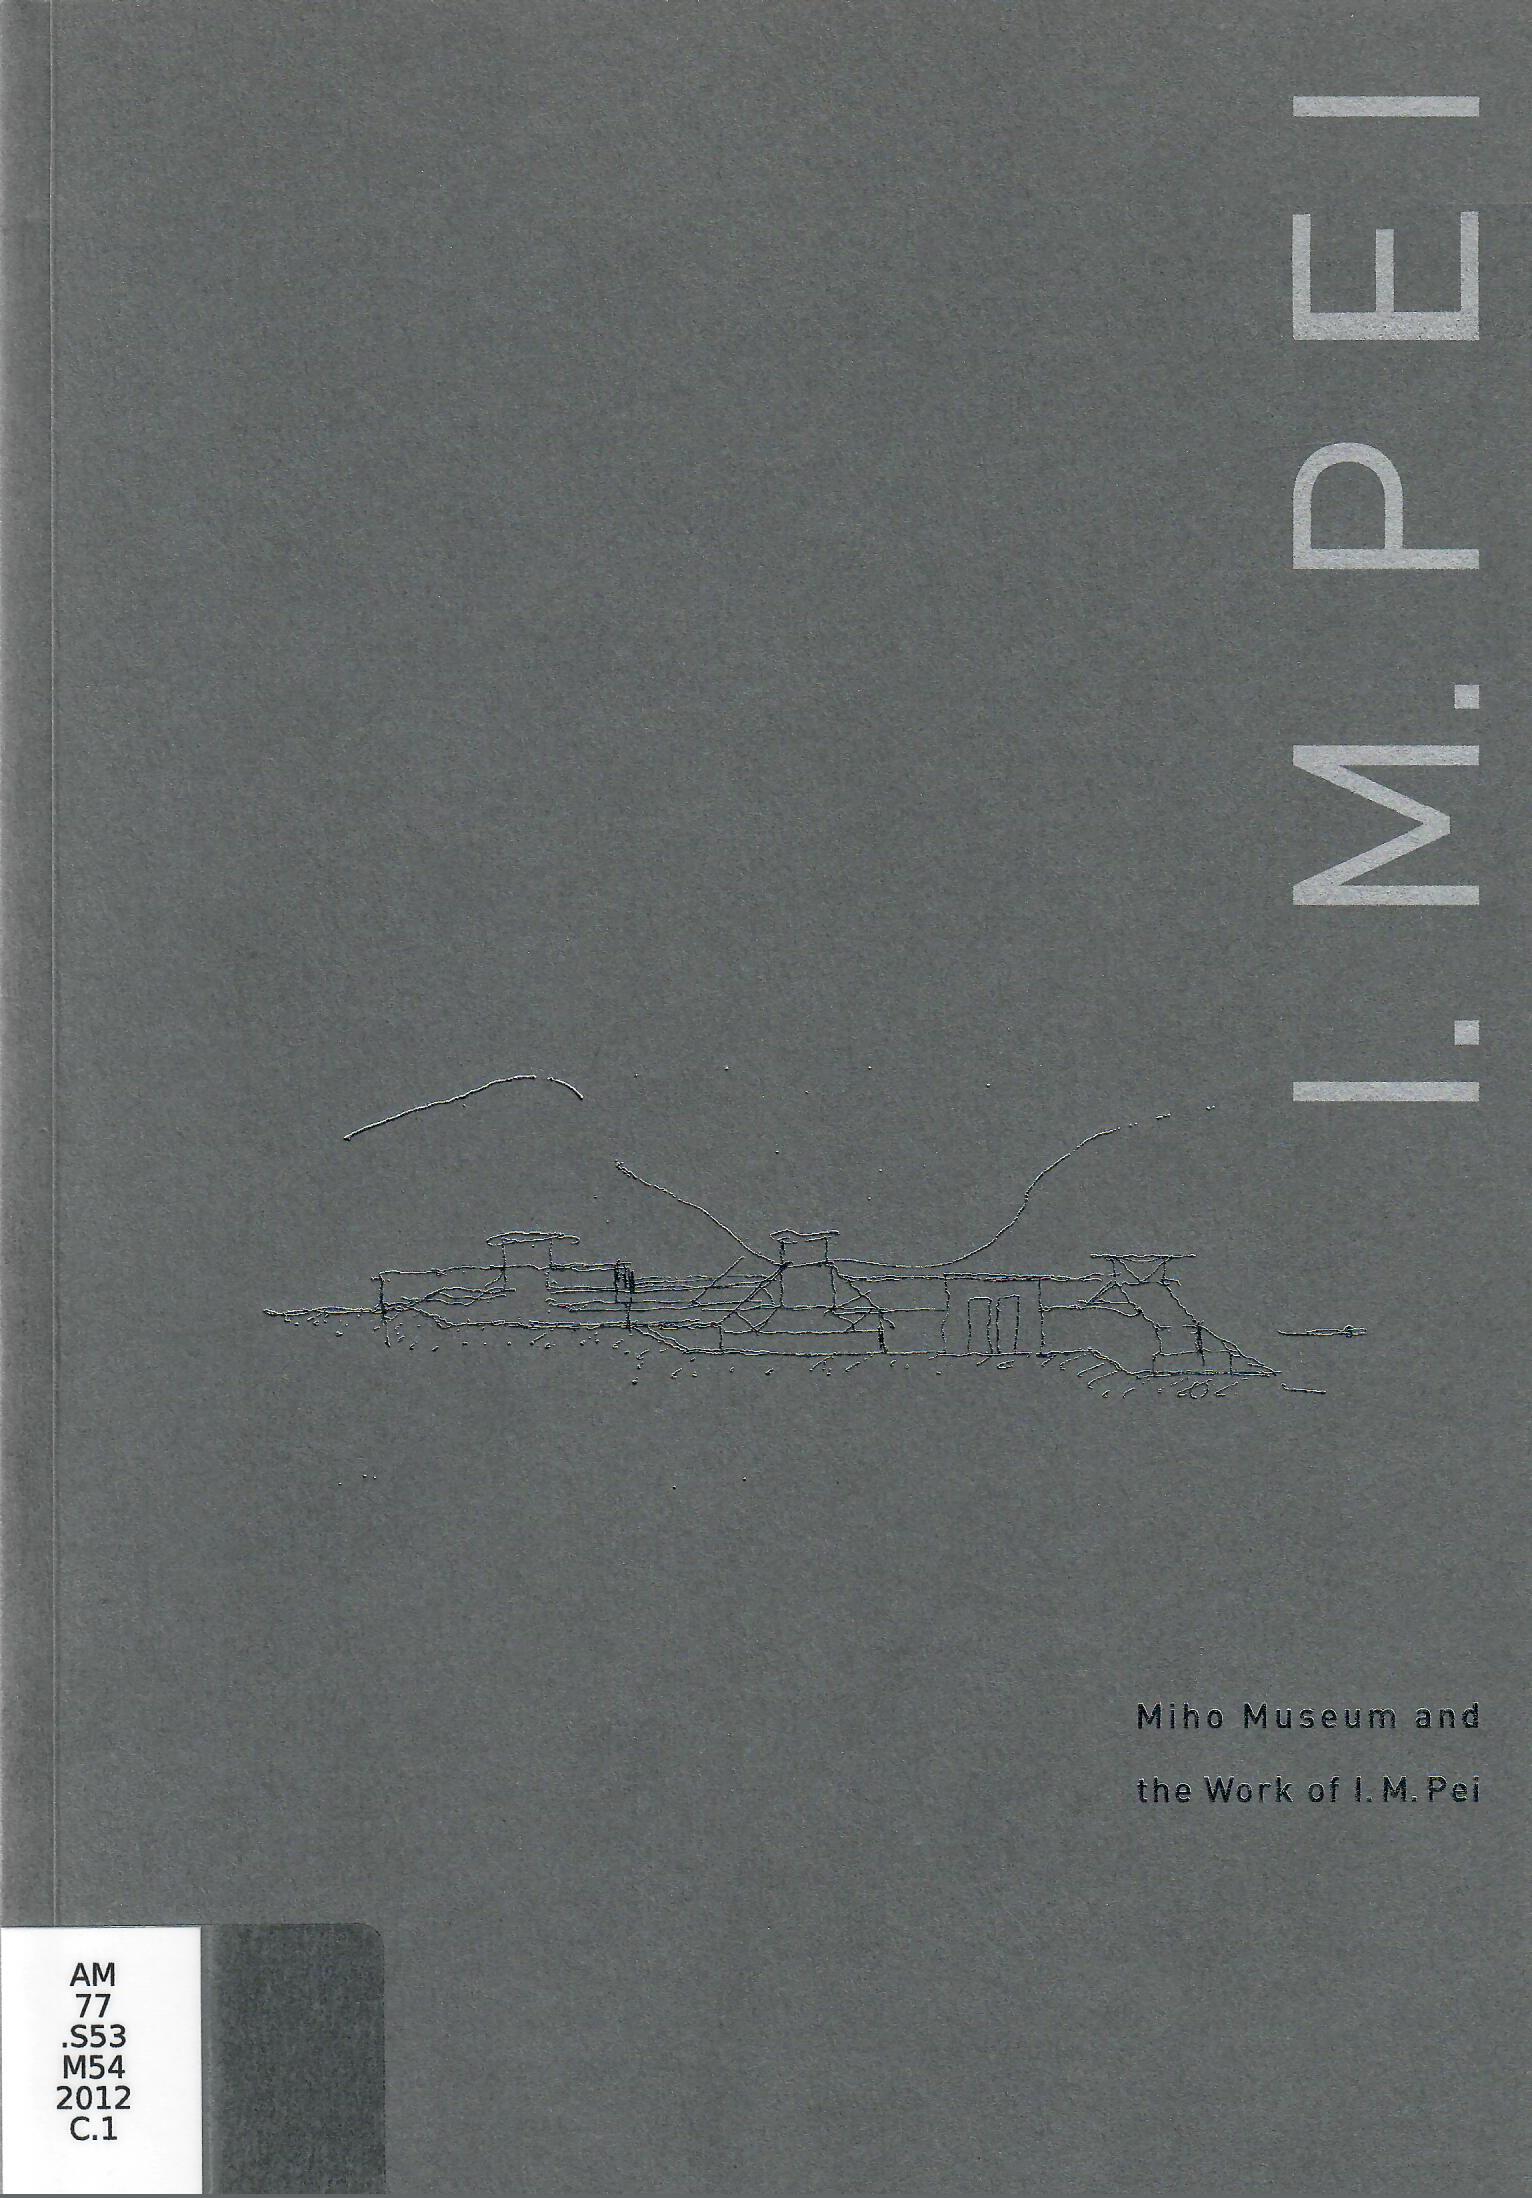 Miho Museum and the Work of I. M. Pei